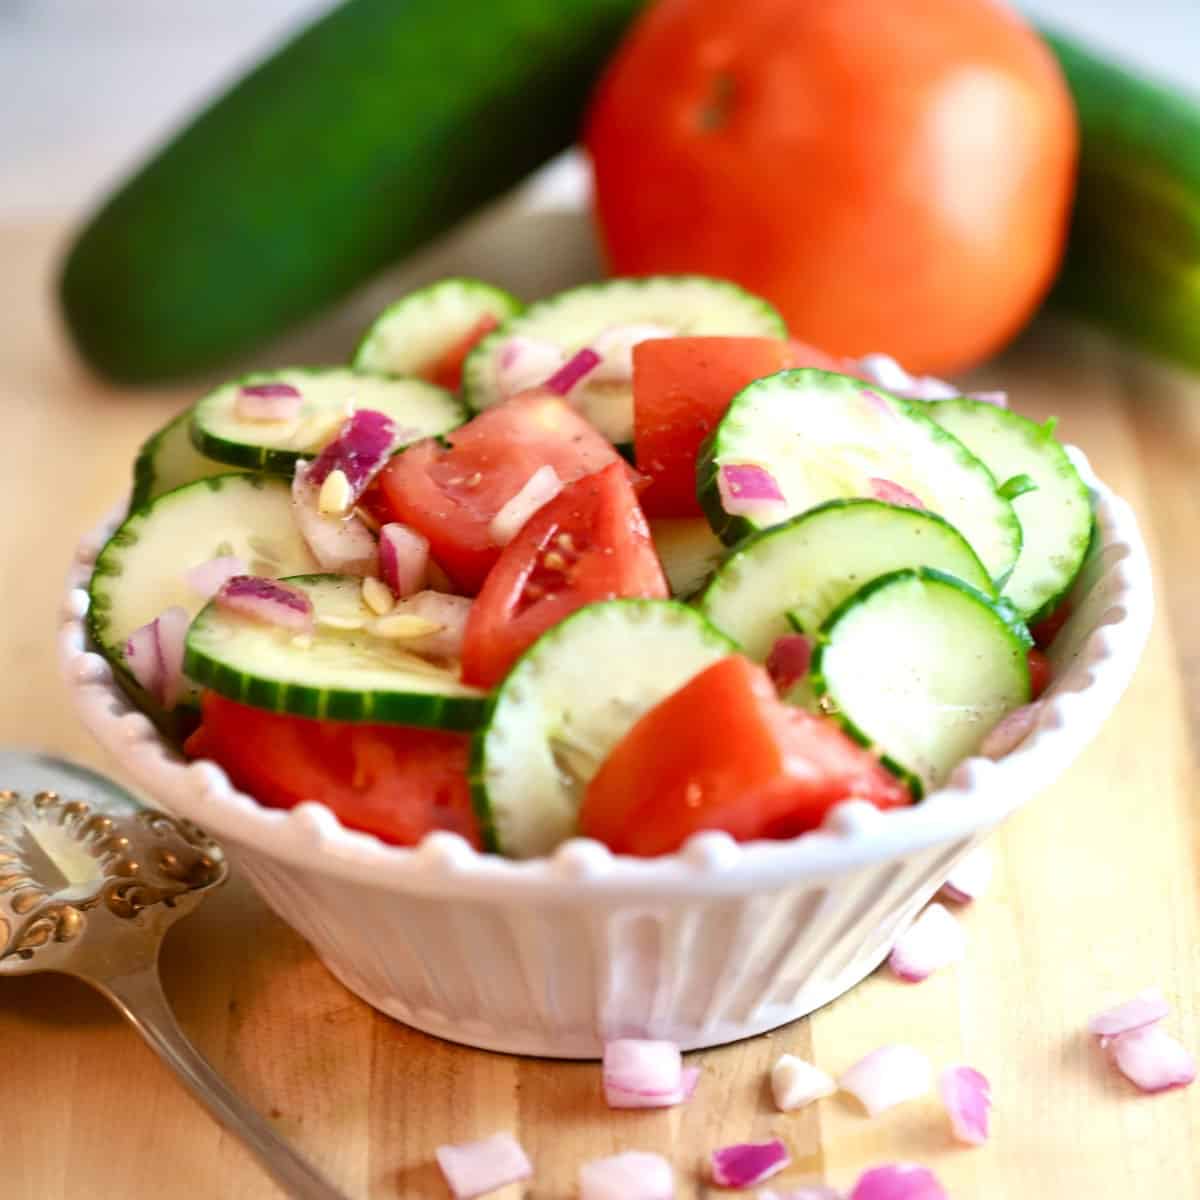 Sliced cucumbers, tomatoes and onion in a white bowl.